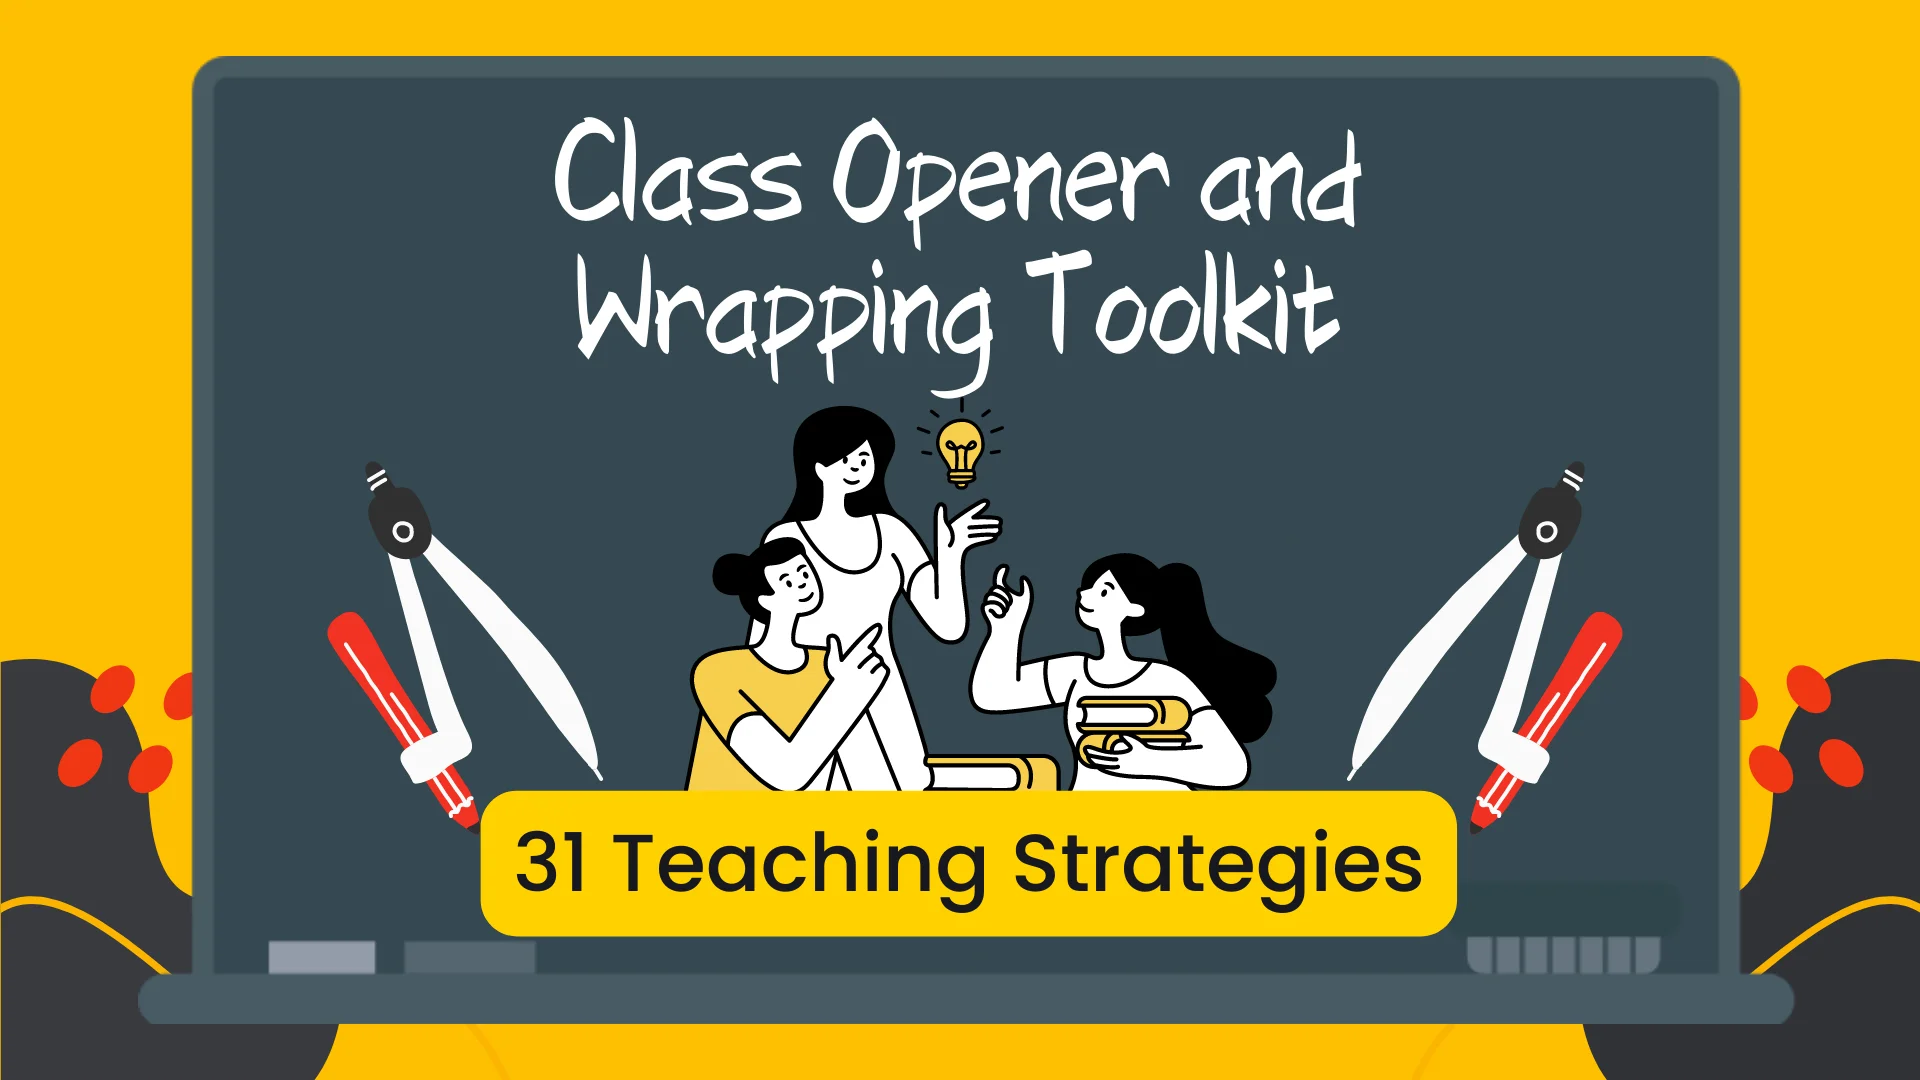 Class Opener and Wrapping Toolkit 31 Teaching Strategies Course Image